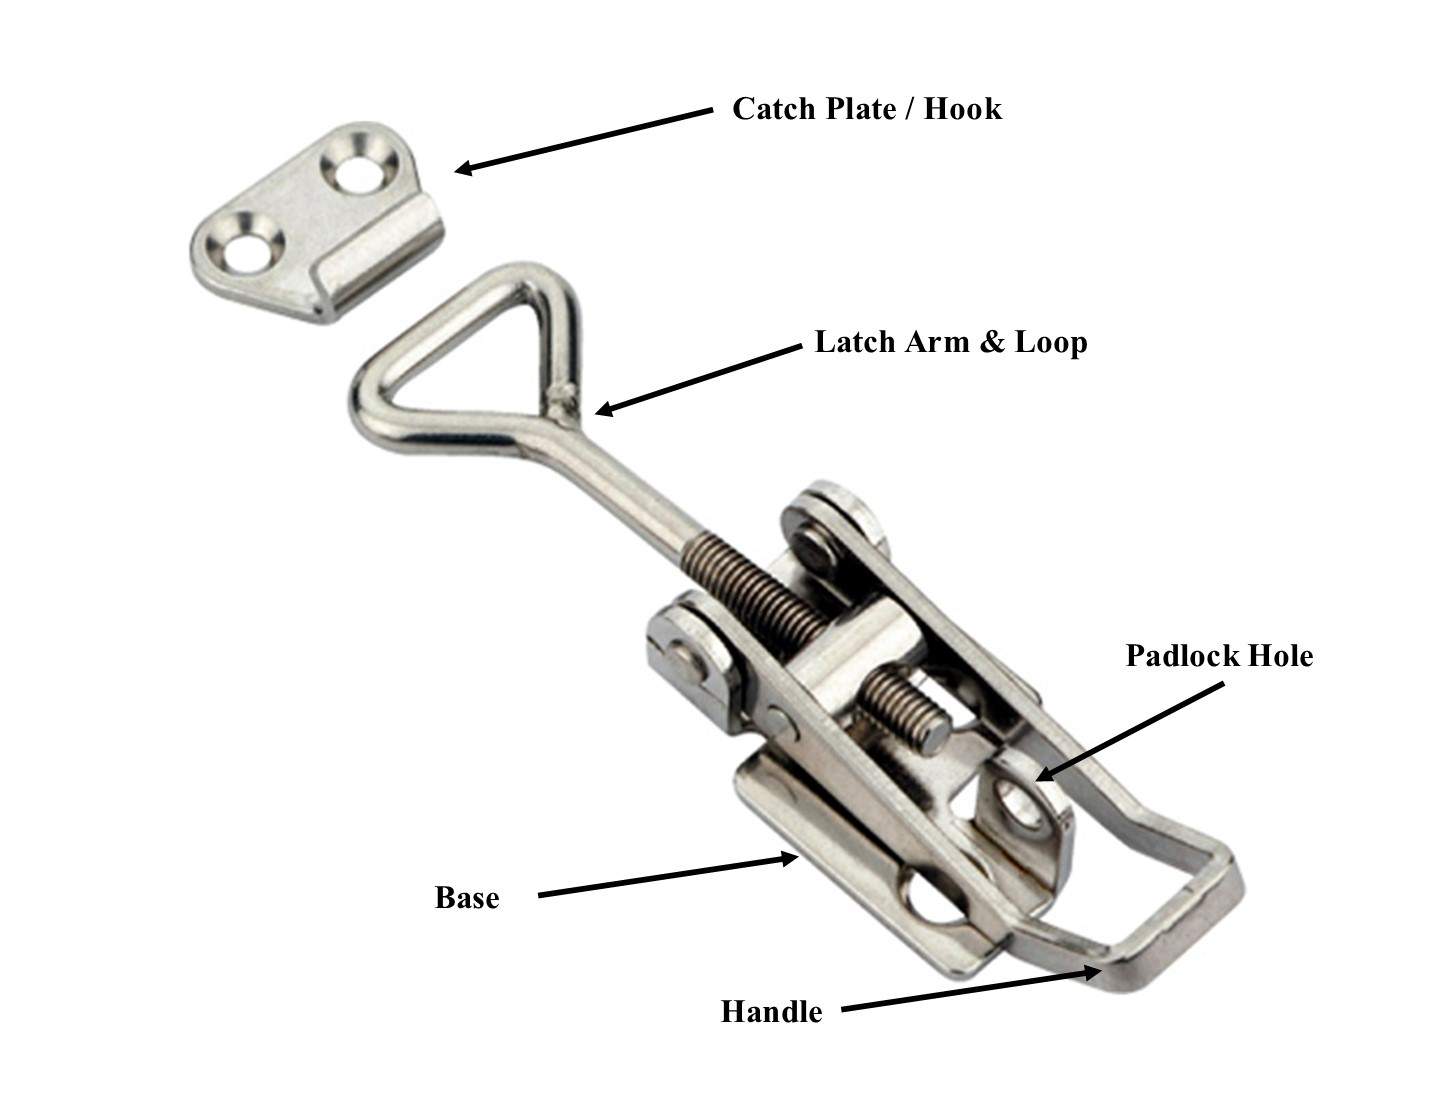 How to choose the right Toggle Latches for your application.